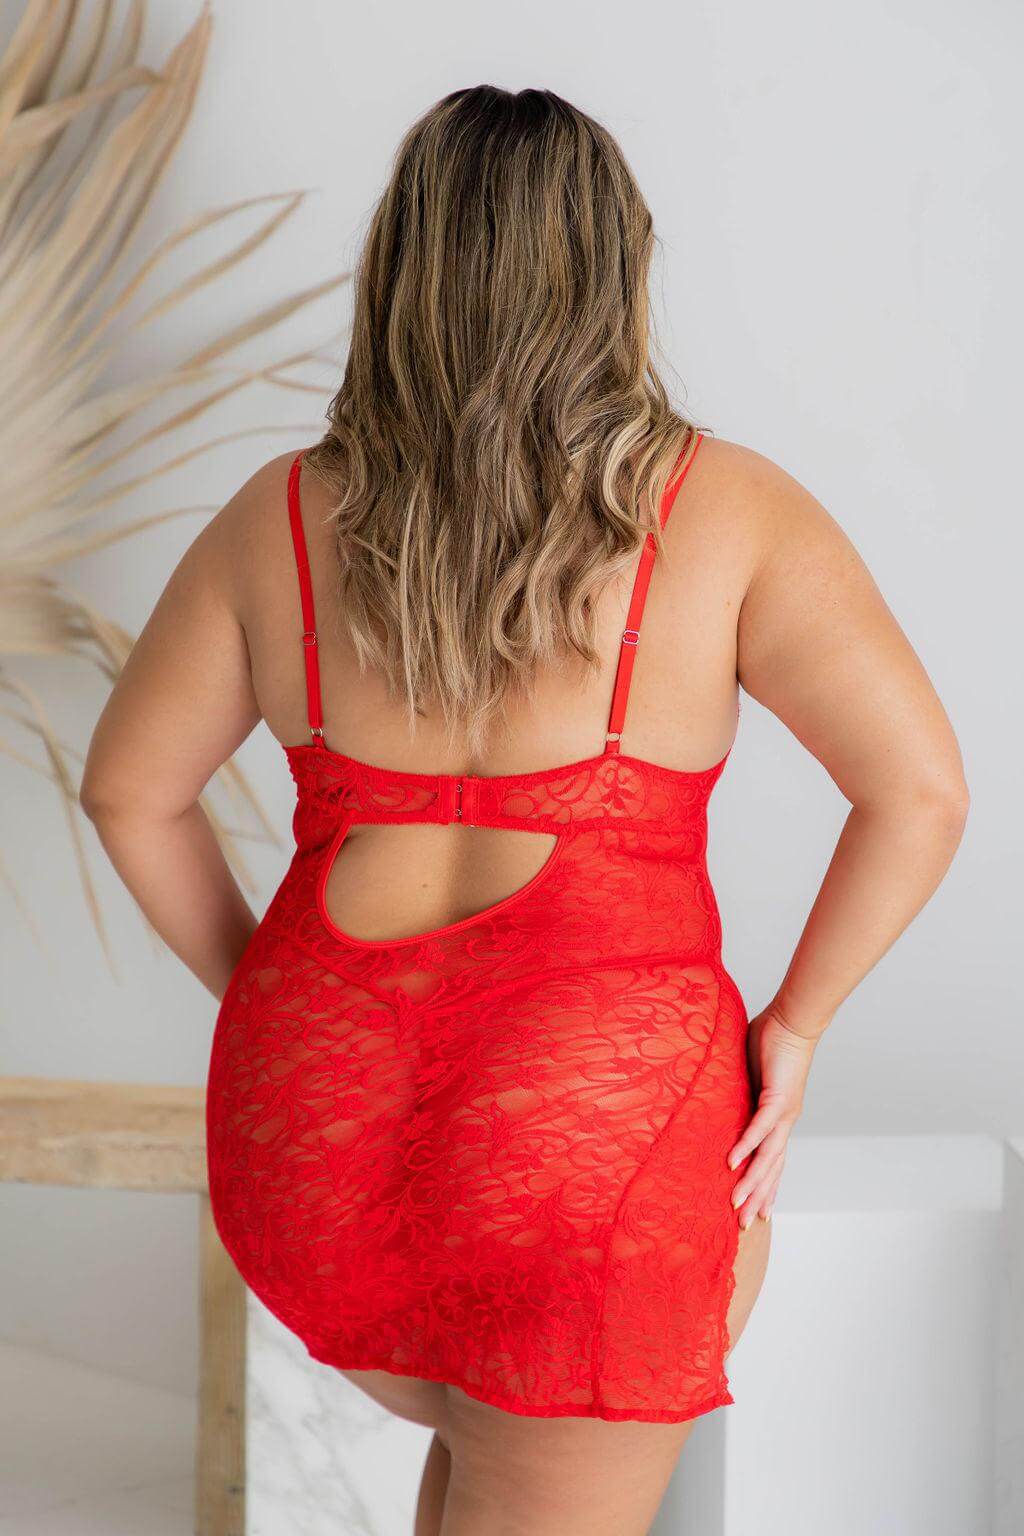 Cobra Red Lace Chemise - $45.00 - Corsets - Naked Curve